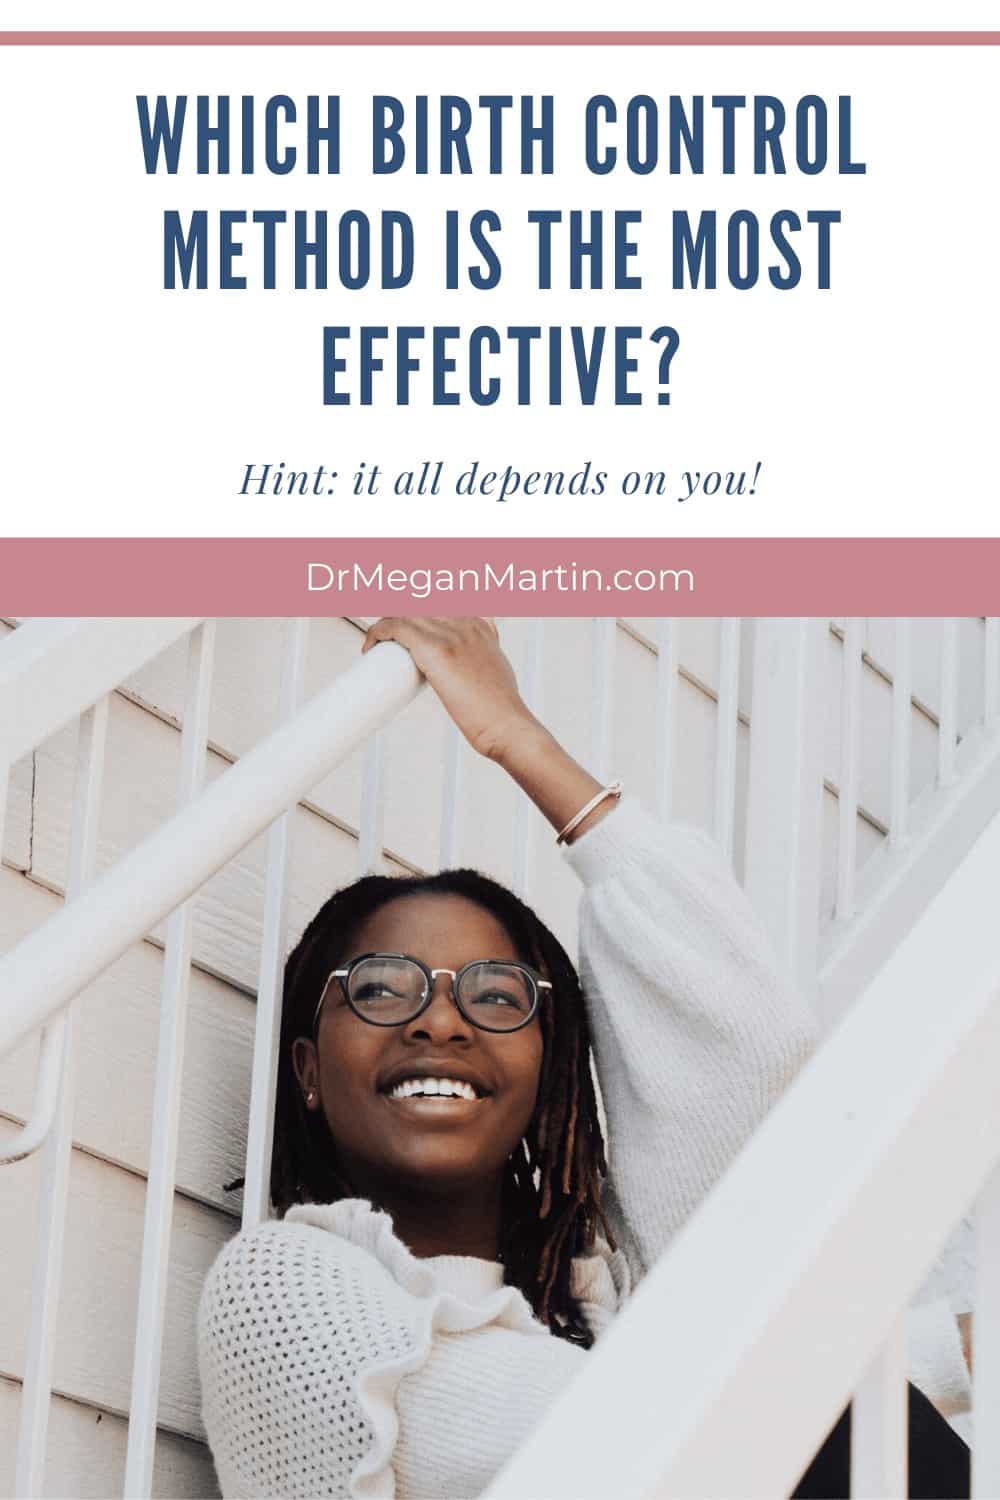 Which birth control method is the most effective?